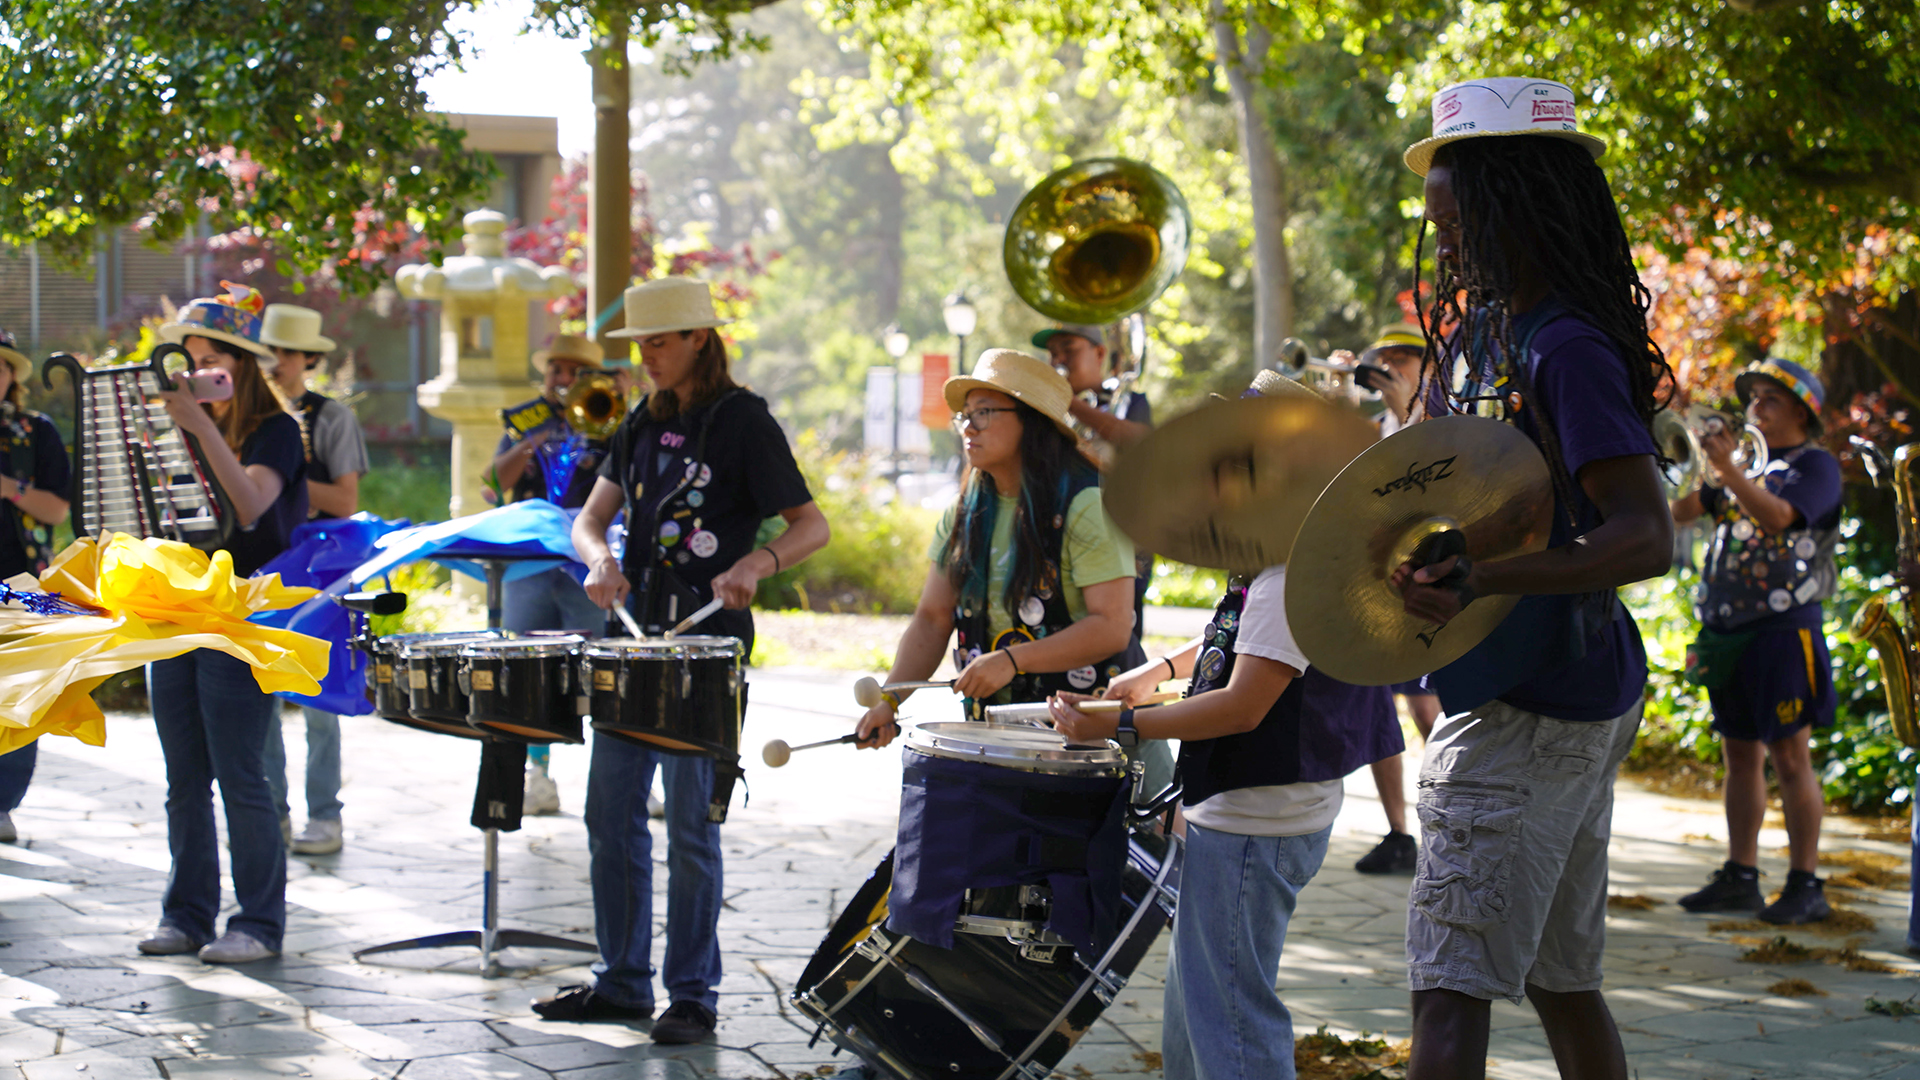 About a dozen Cal Band members perform on campus